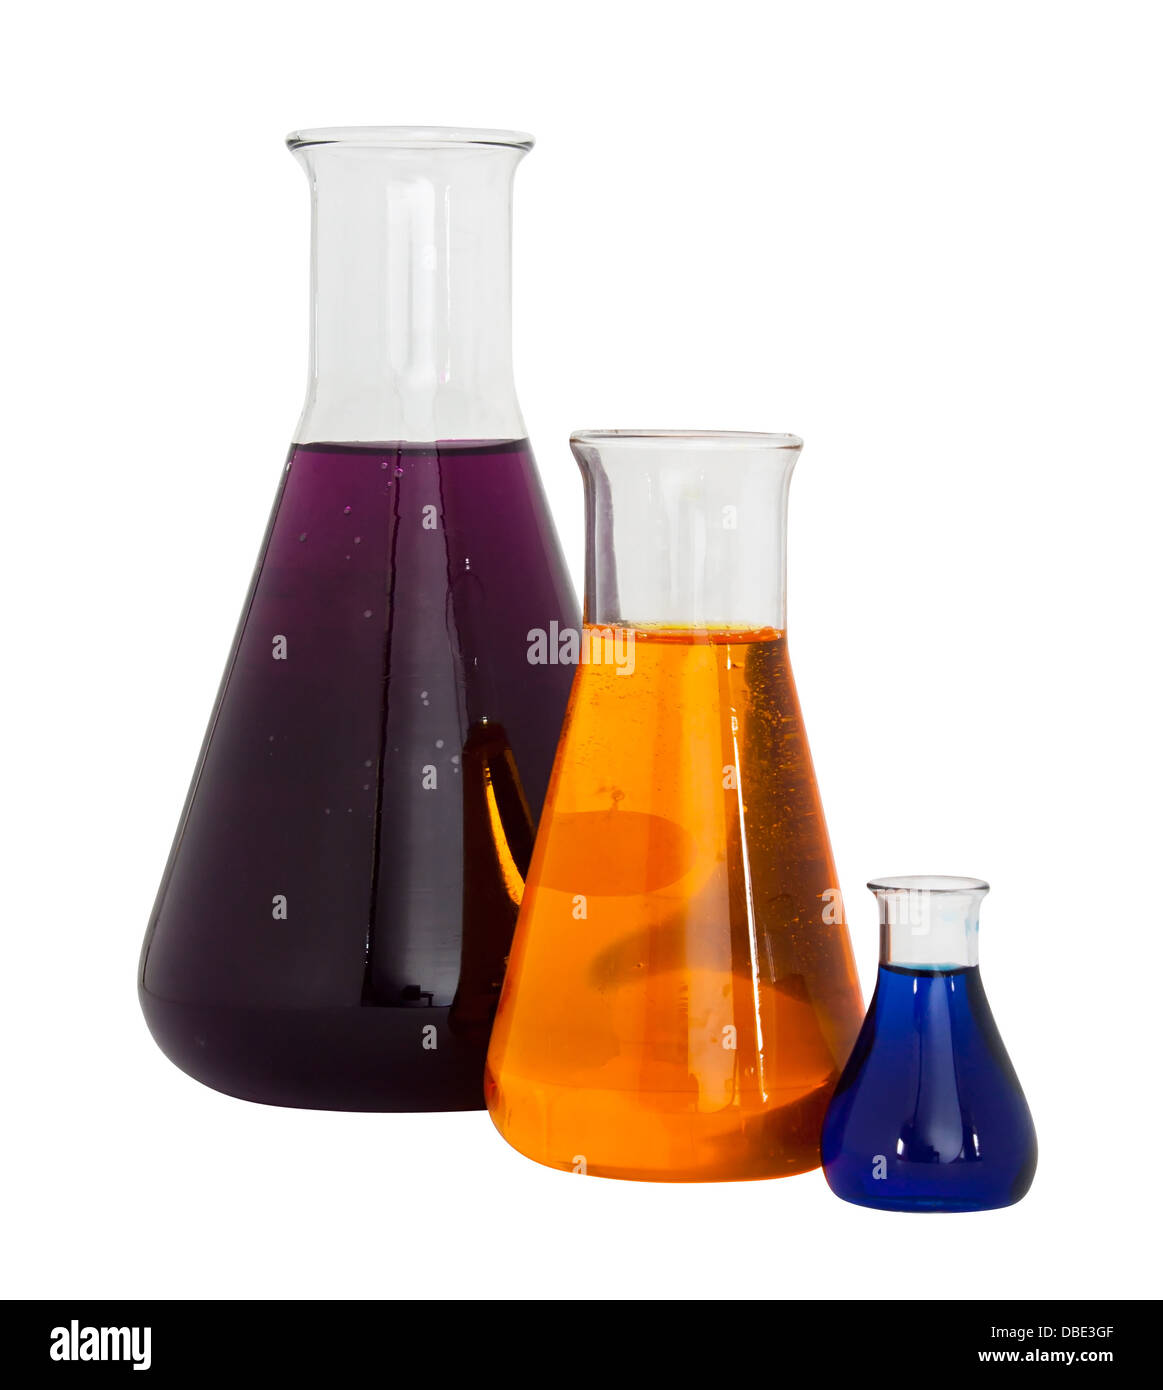 Three conical flasks filled with colored solutions isolated against a white background Stock Photo